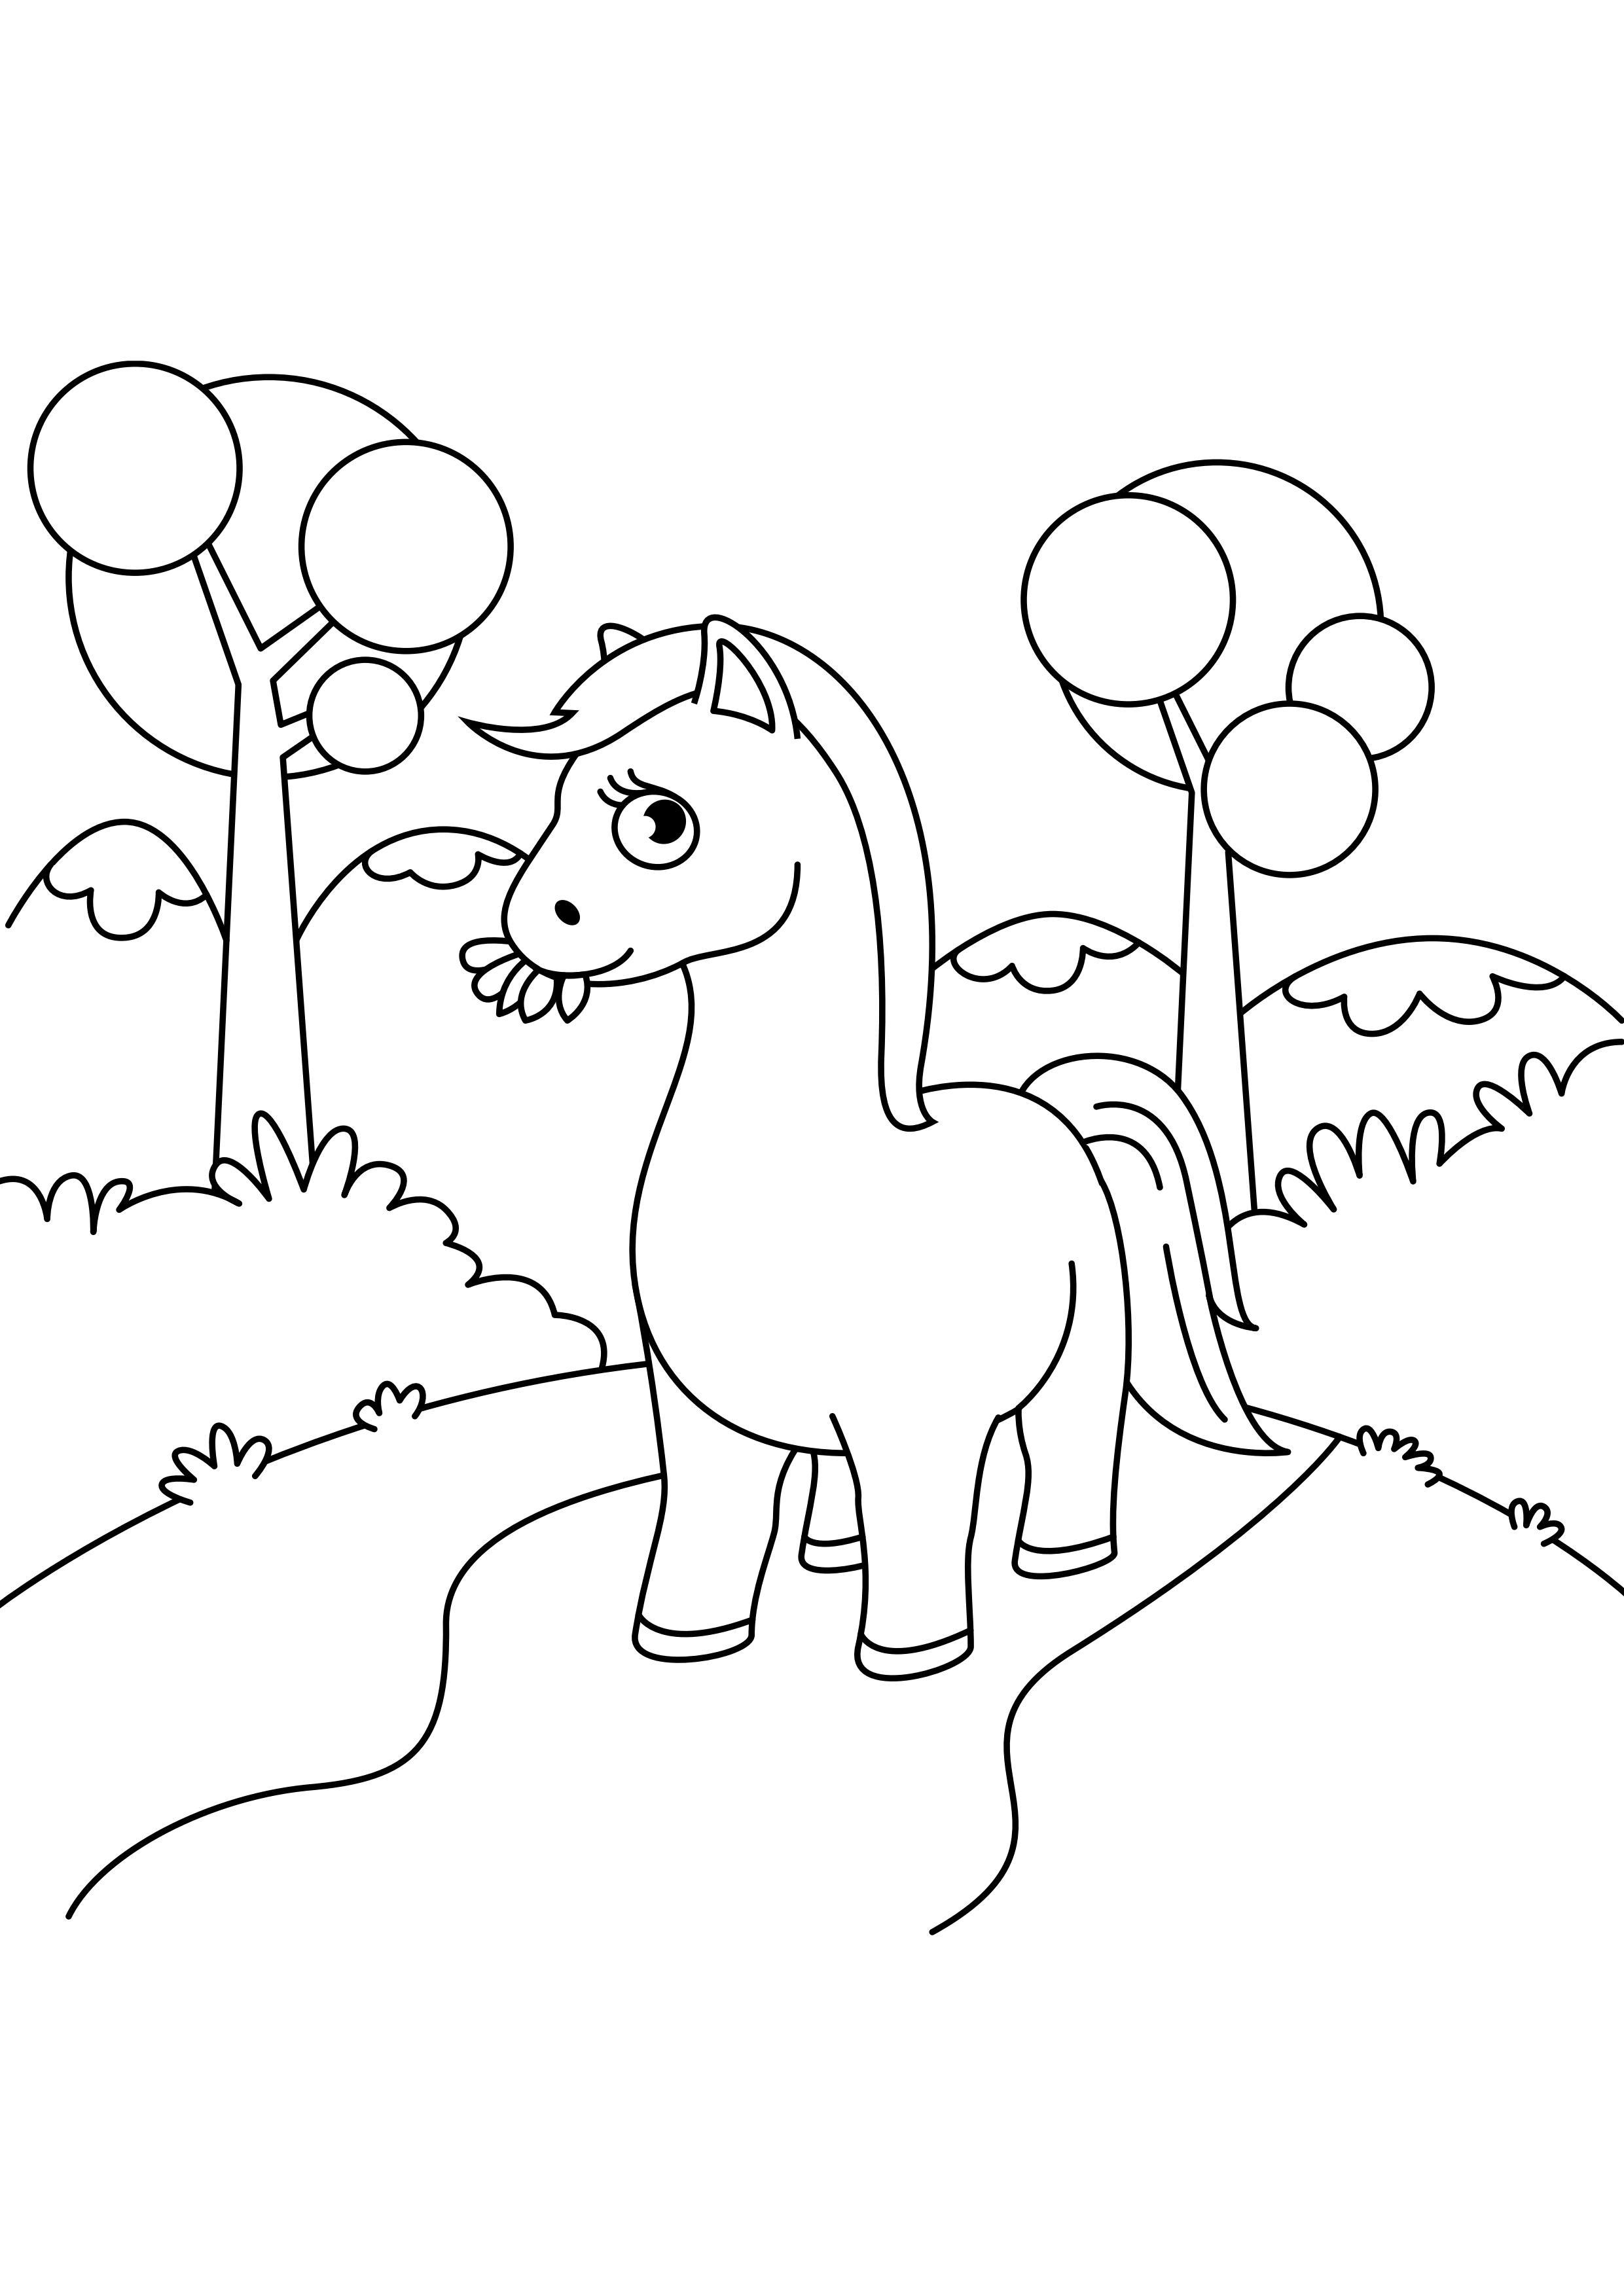 Coloring page horse in the forest